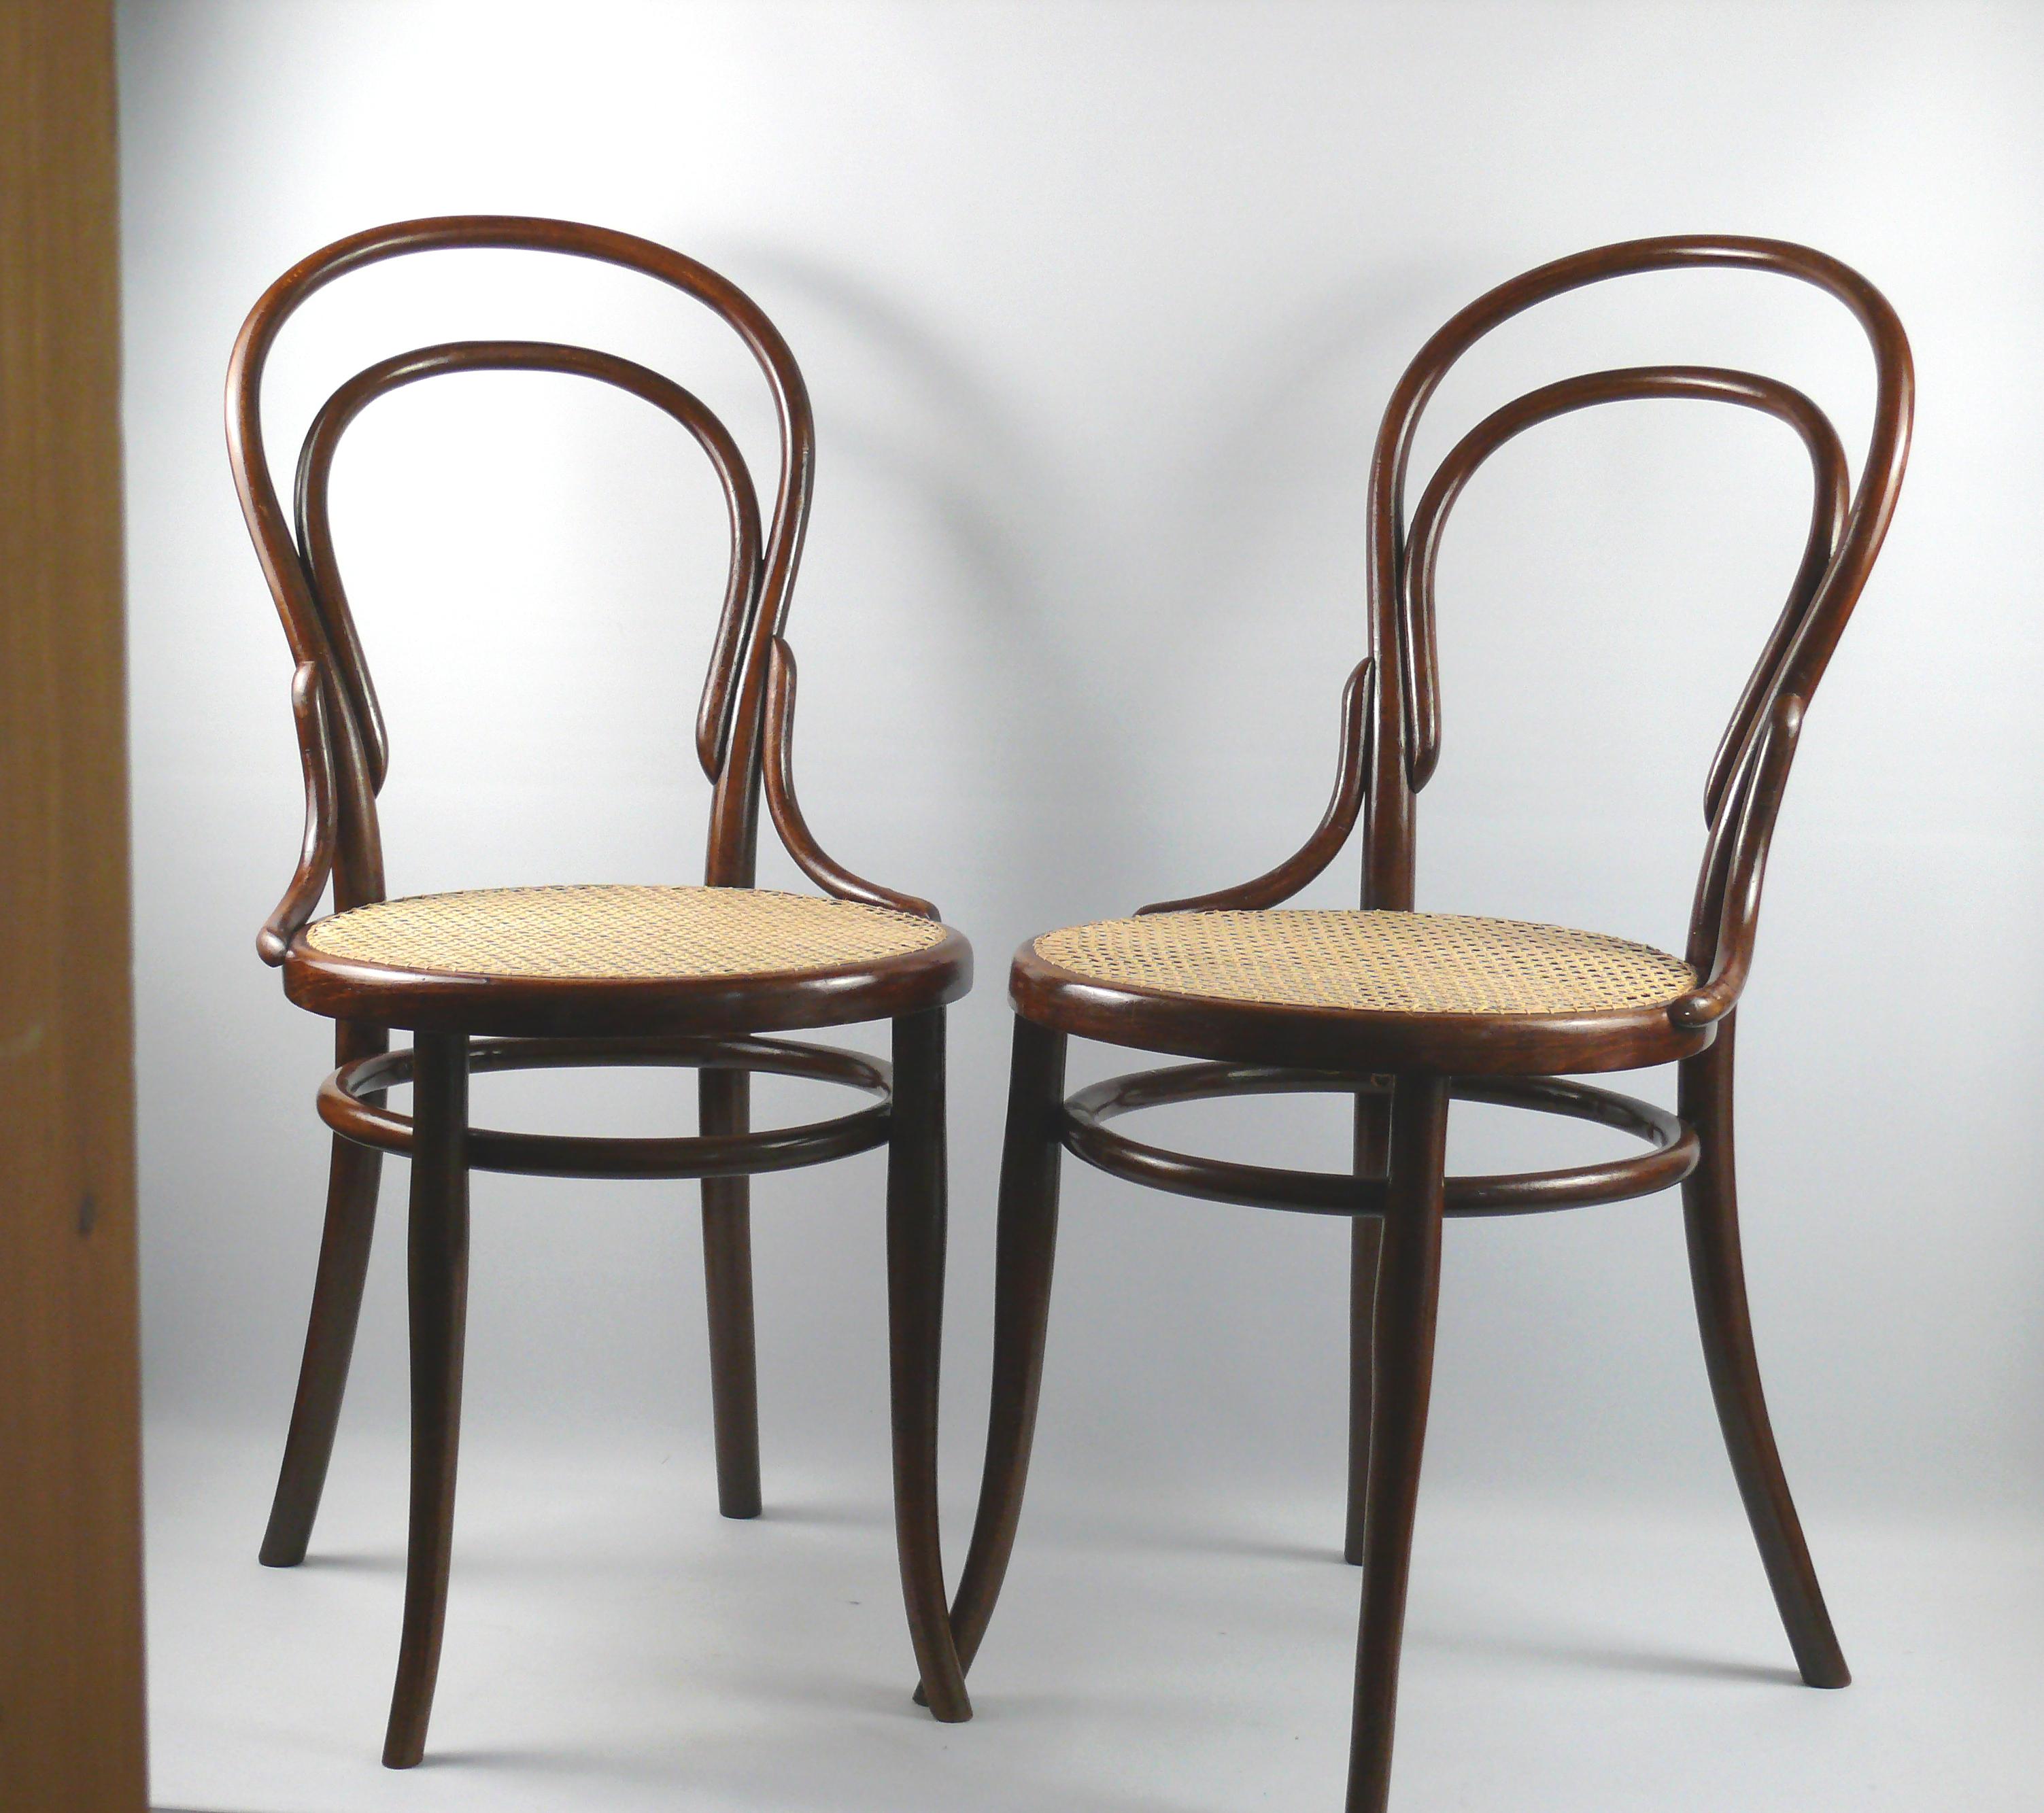 Collector's items: Set of 2original bentwood chairs from the Thonet company - Vienna, model no. 14 - designed by Michael Thonet. These chairs were the company's best seller for decades and were often copied. This chair comes from Vienna after 1881